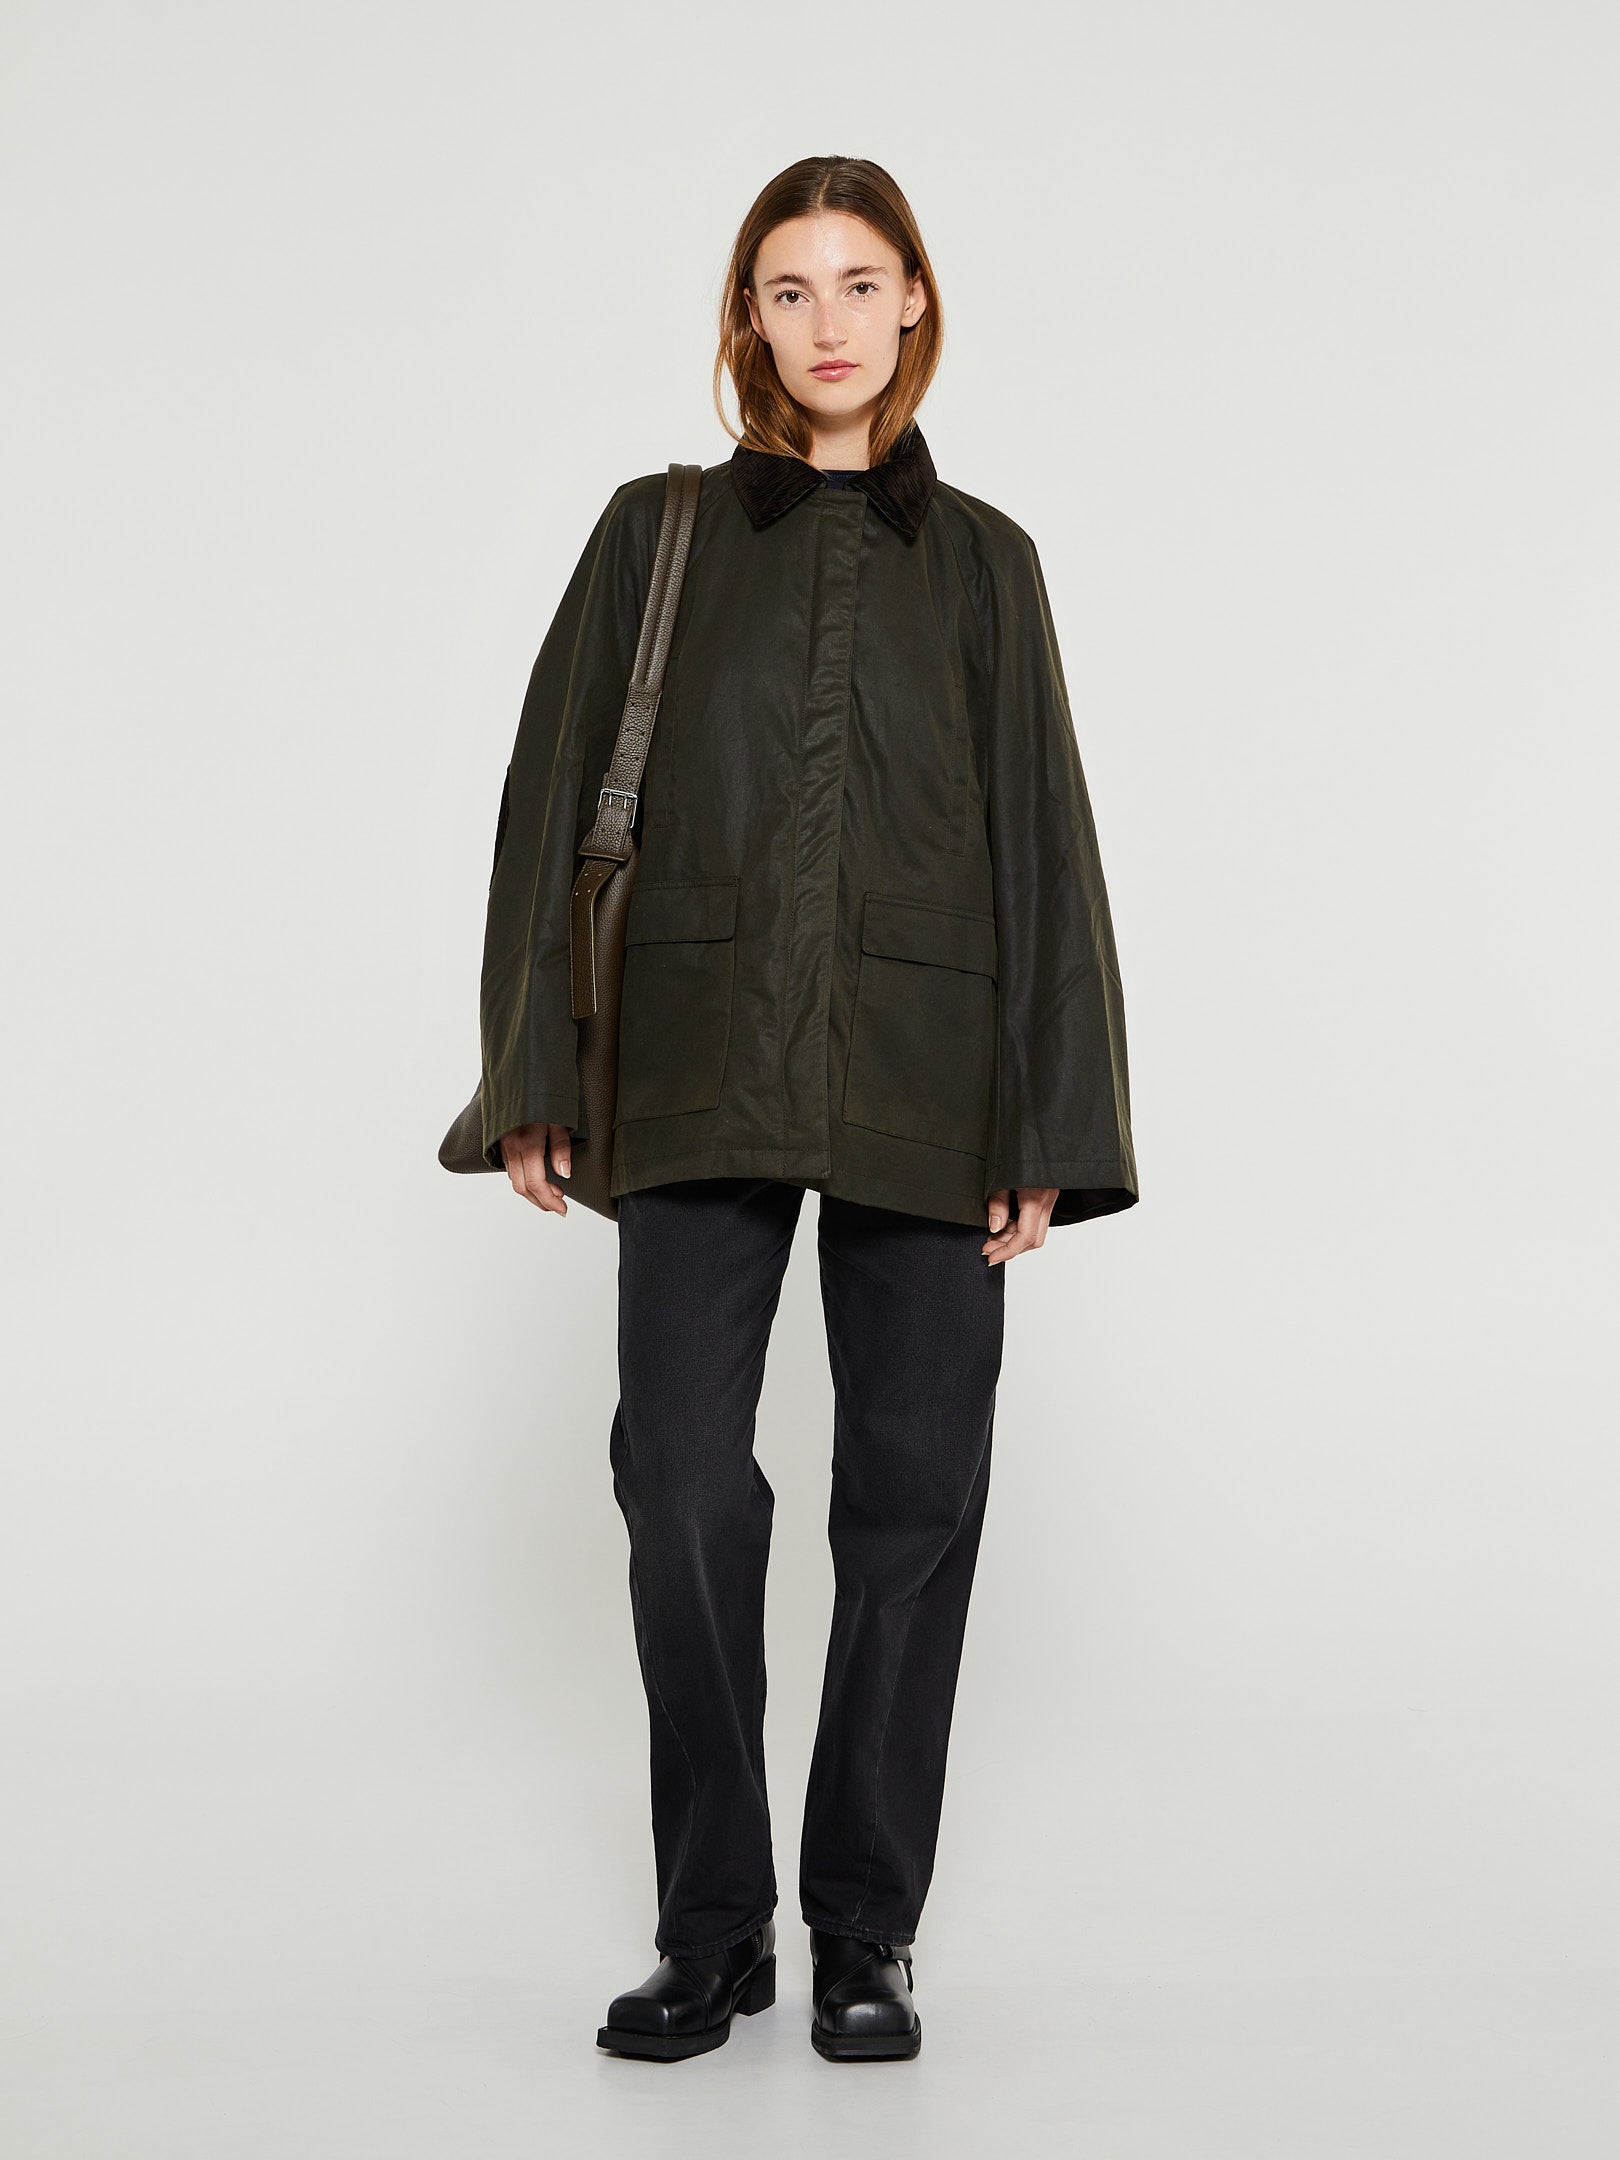 Coats & Jackets women at Shop the stoy selection | for